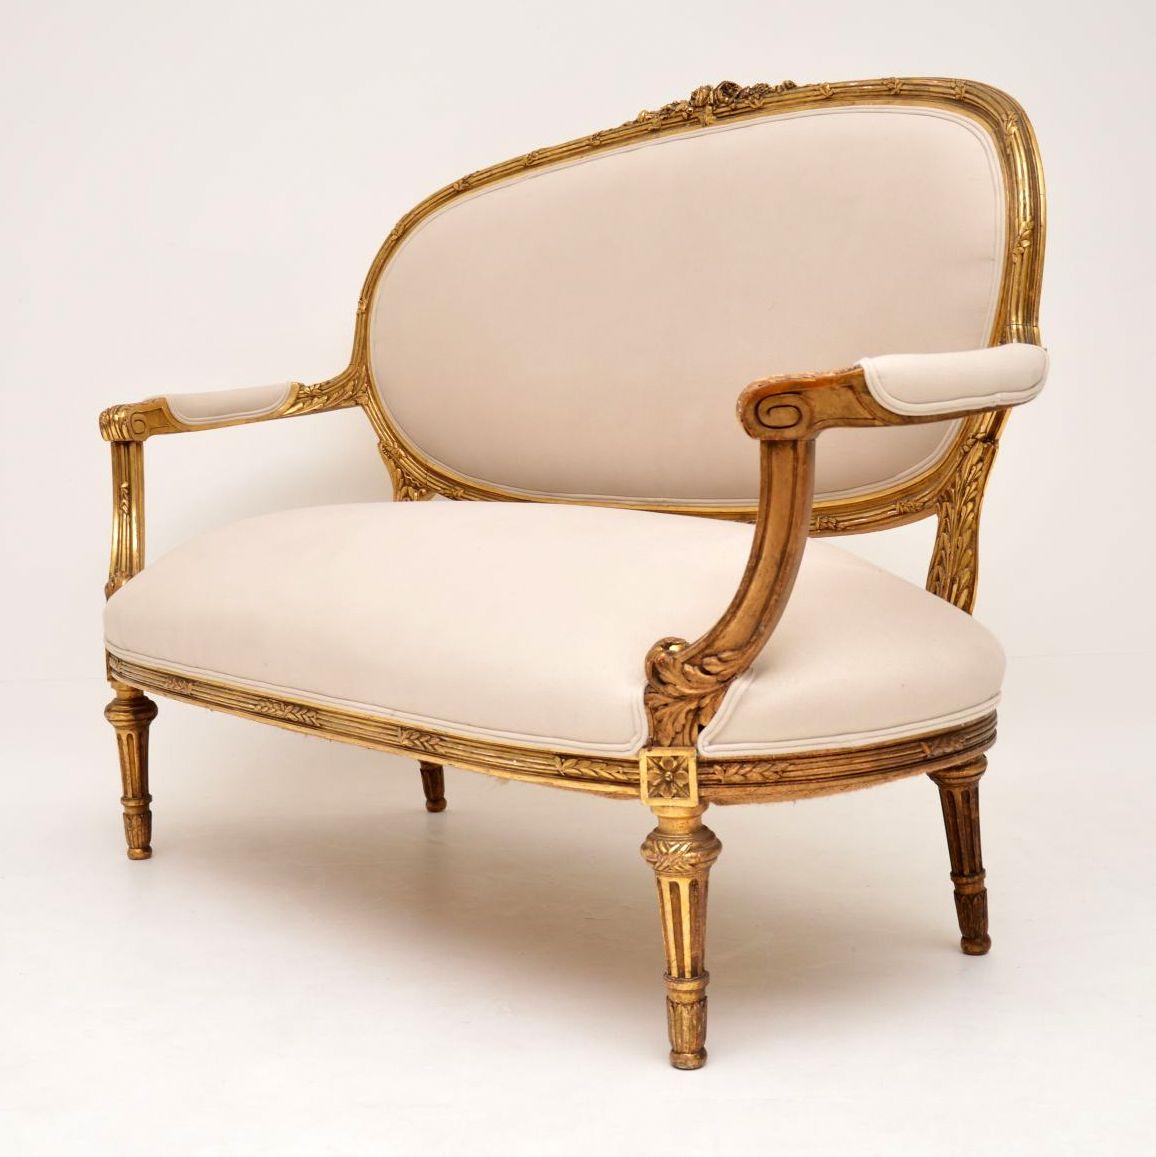 Victorian Antique French Giltwood Sofa